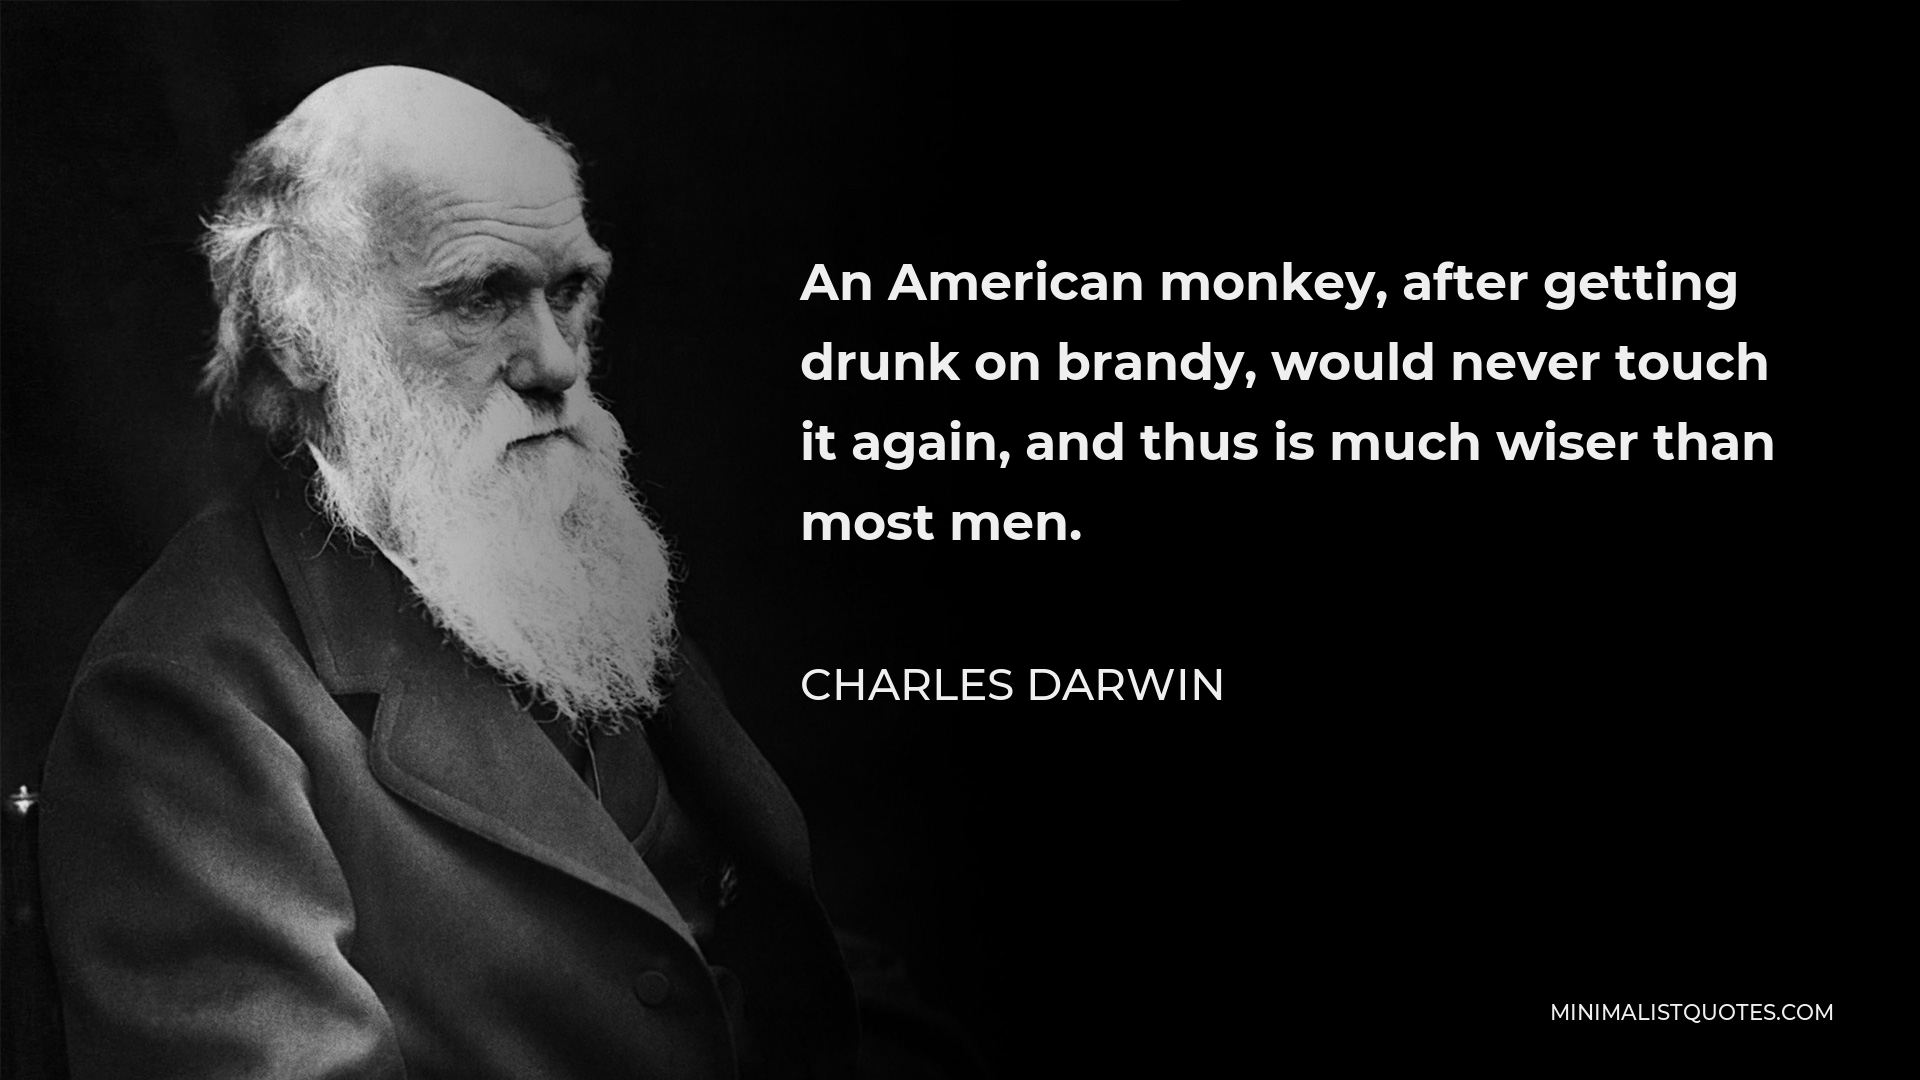 Charles Darwin Quote - An American monkey, after getting drunk on brandy, would never touch it again, and thus is much wiser than most men.